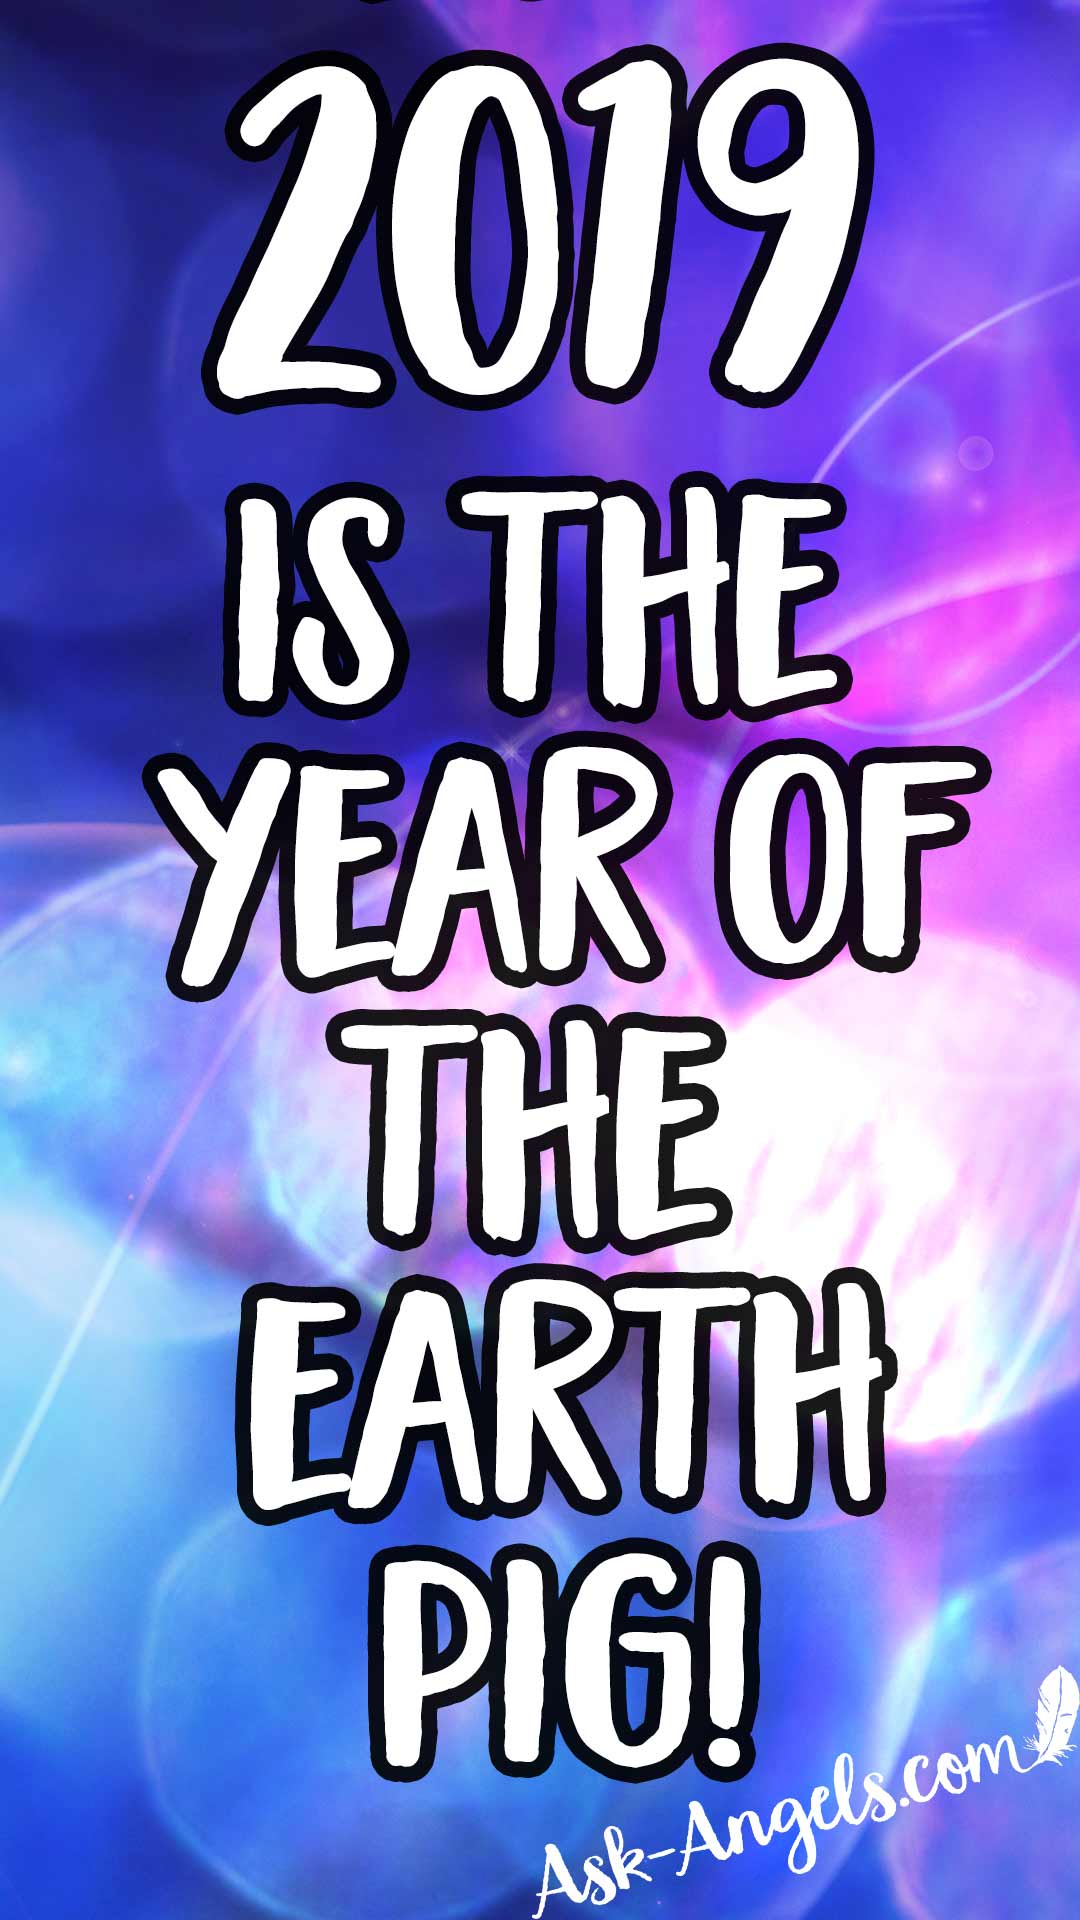 2019 Is the Year of the Earth Pig